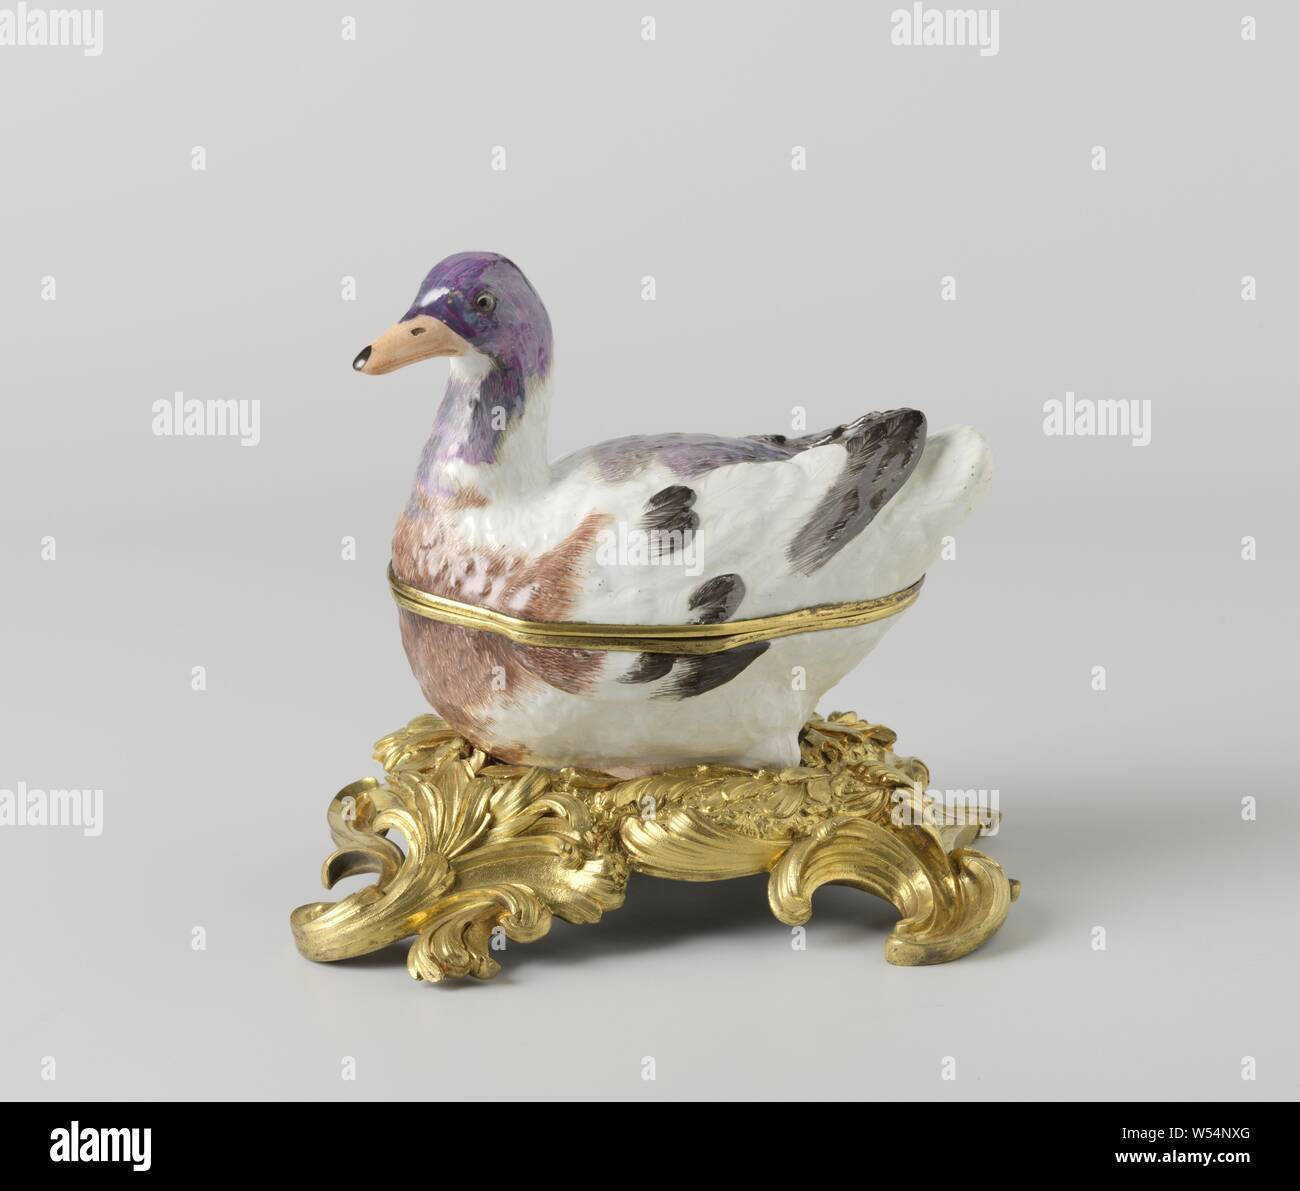 Box in the shape of a duck, Box of painted porcelain, belly of the duck, with gold-colored edge. The duck is partly painted in blue, green, brown-gray and black. The box is unnoticed., Meissener Porzellan Manufaktur, Meissen, c. 1740 - c. 1748 and/or c. 1750, porcelain (material), bronze (metal), gilding, h 5 cm × w 9 cm × d 14 cm Stock Photo